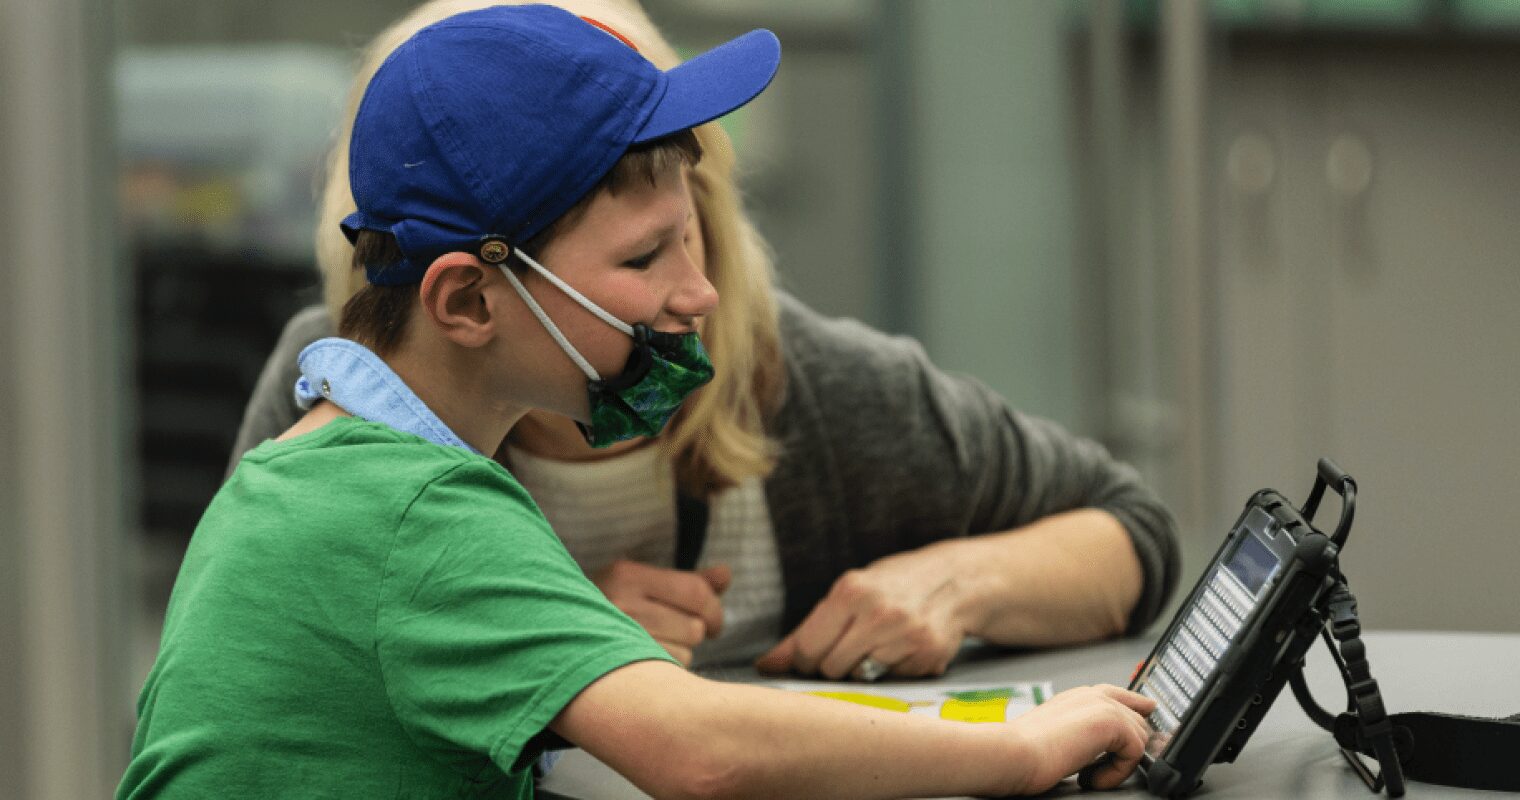 A student wearing a green shirt, blue hat, and green mask, types on an AAC device at a desk with a teacher watching next to him.